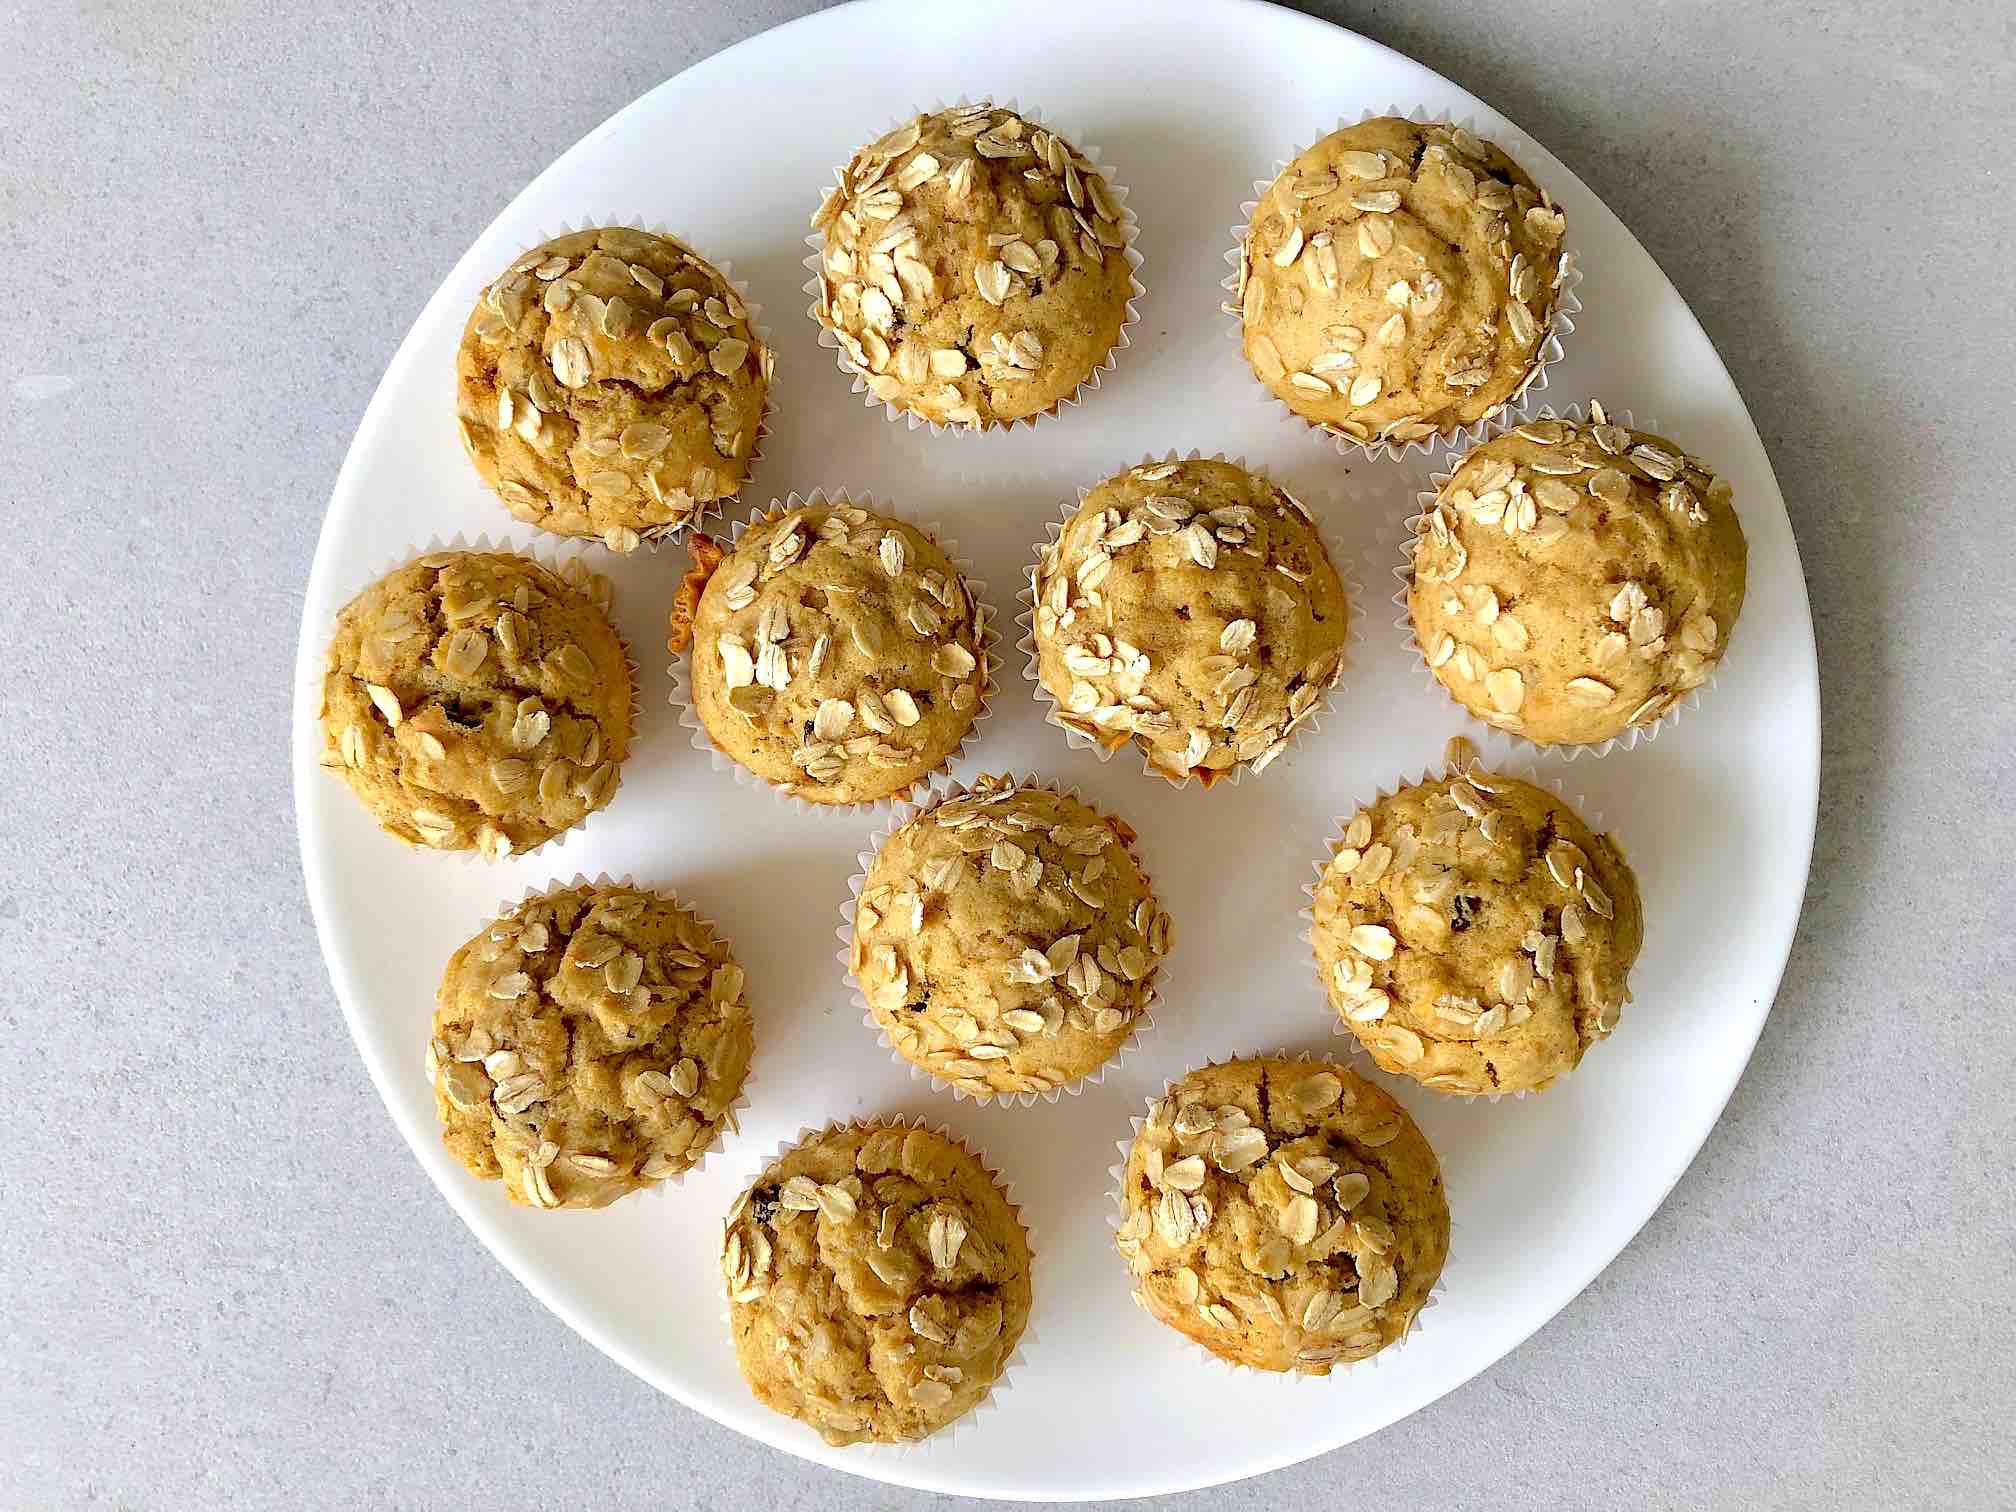 Oatmeal Muffins with apple and raisins